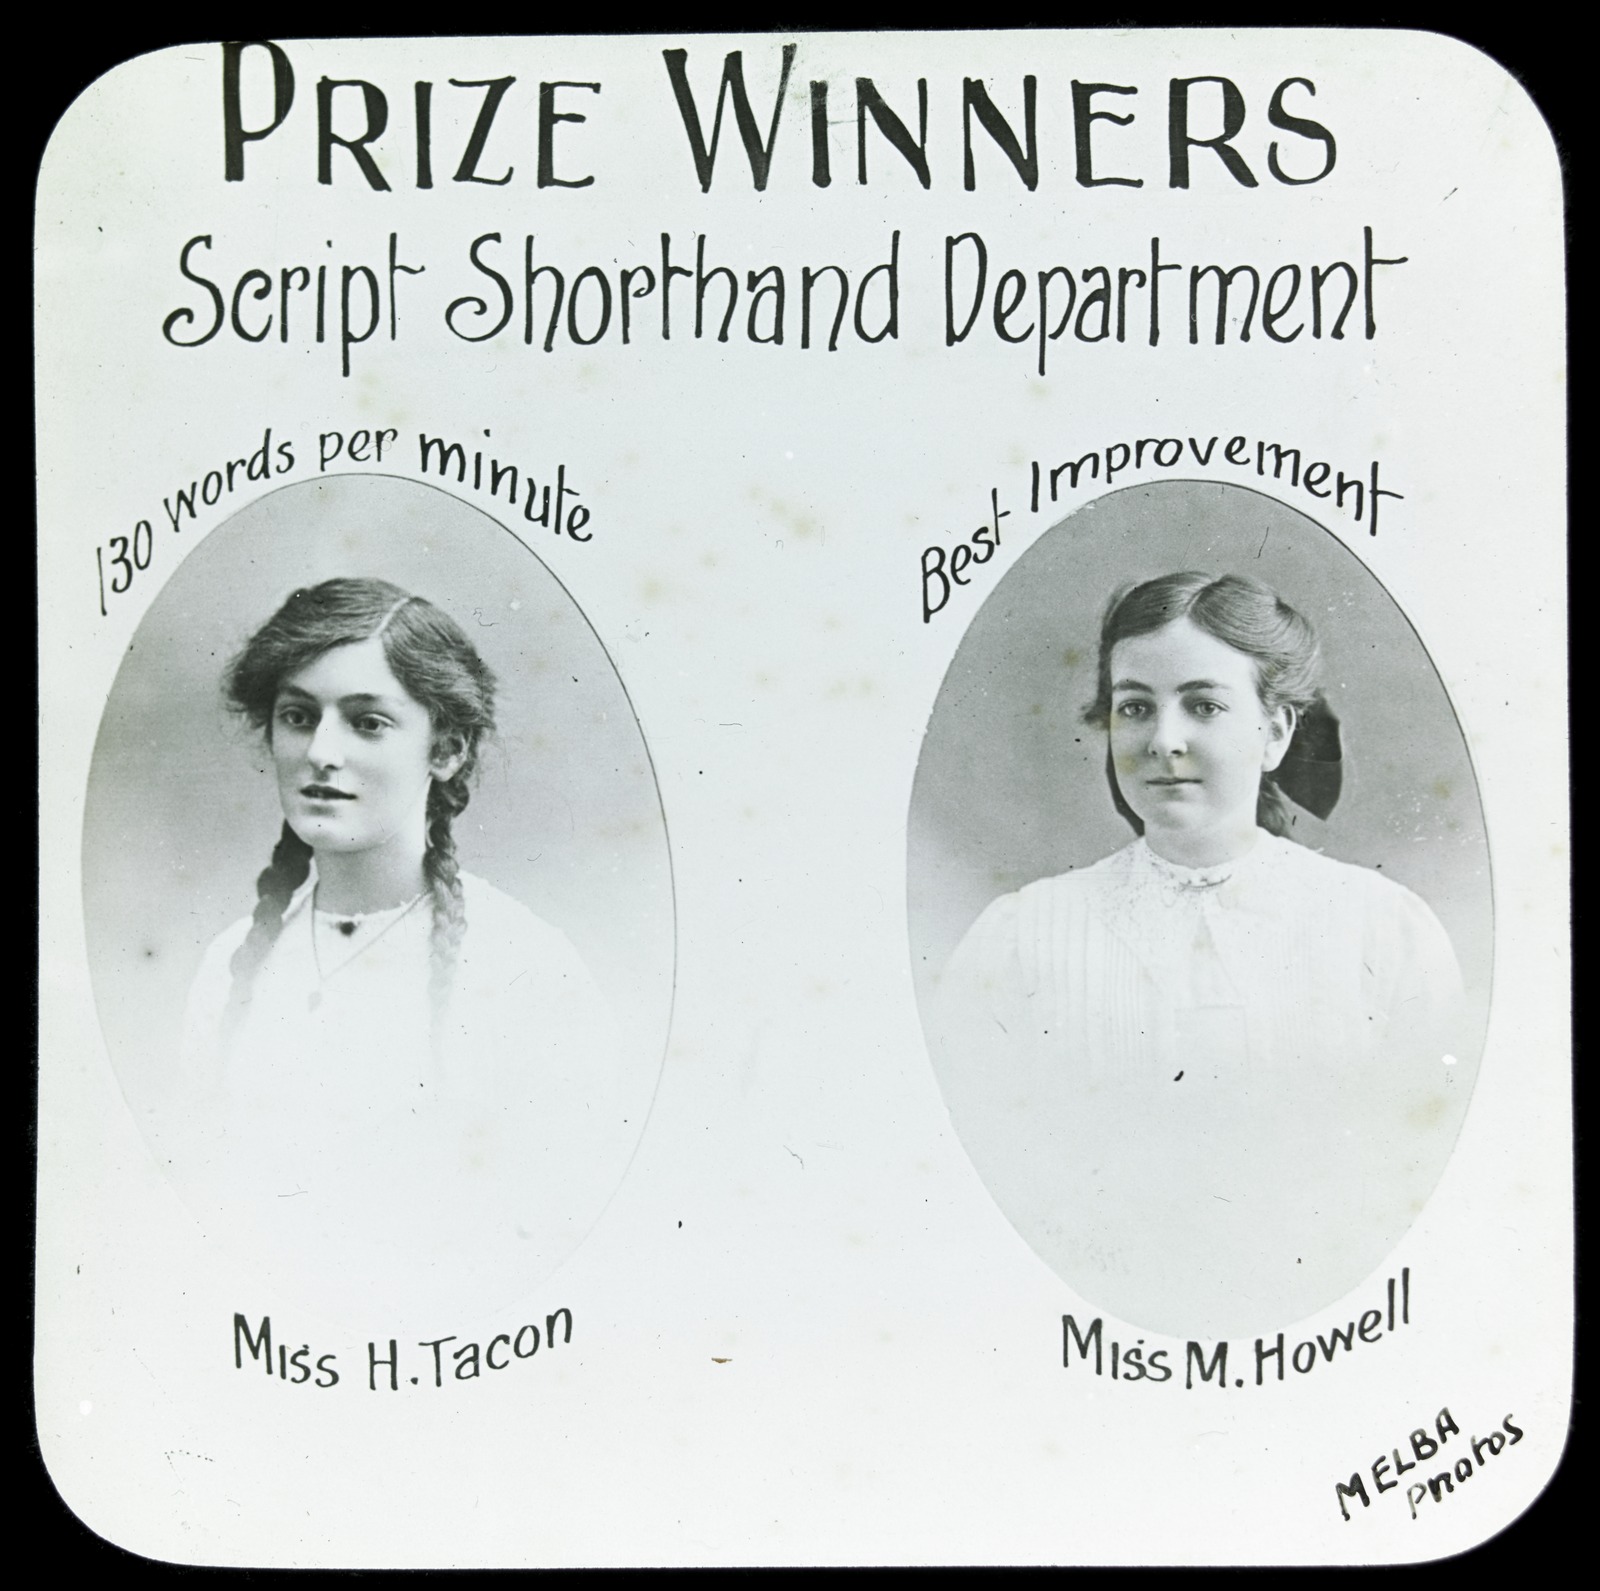 glass lantern slide with two portraits of young women. Written on the slide it says: Prize Winners Script shorthand department